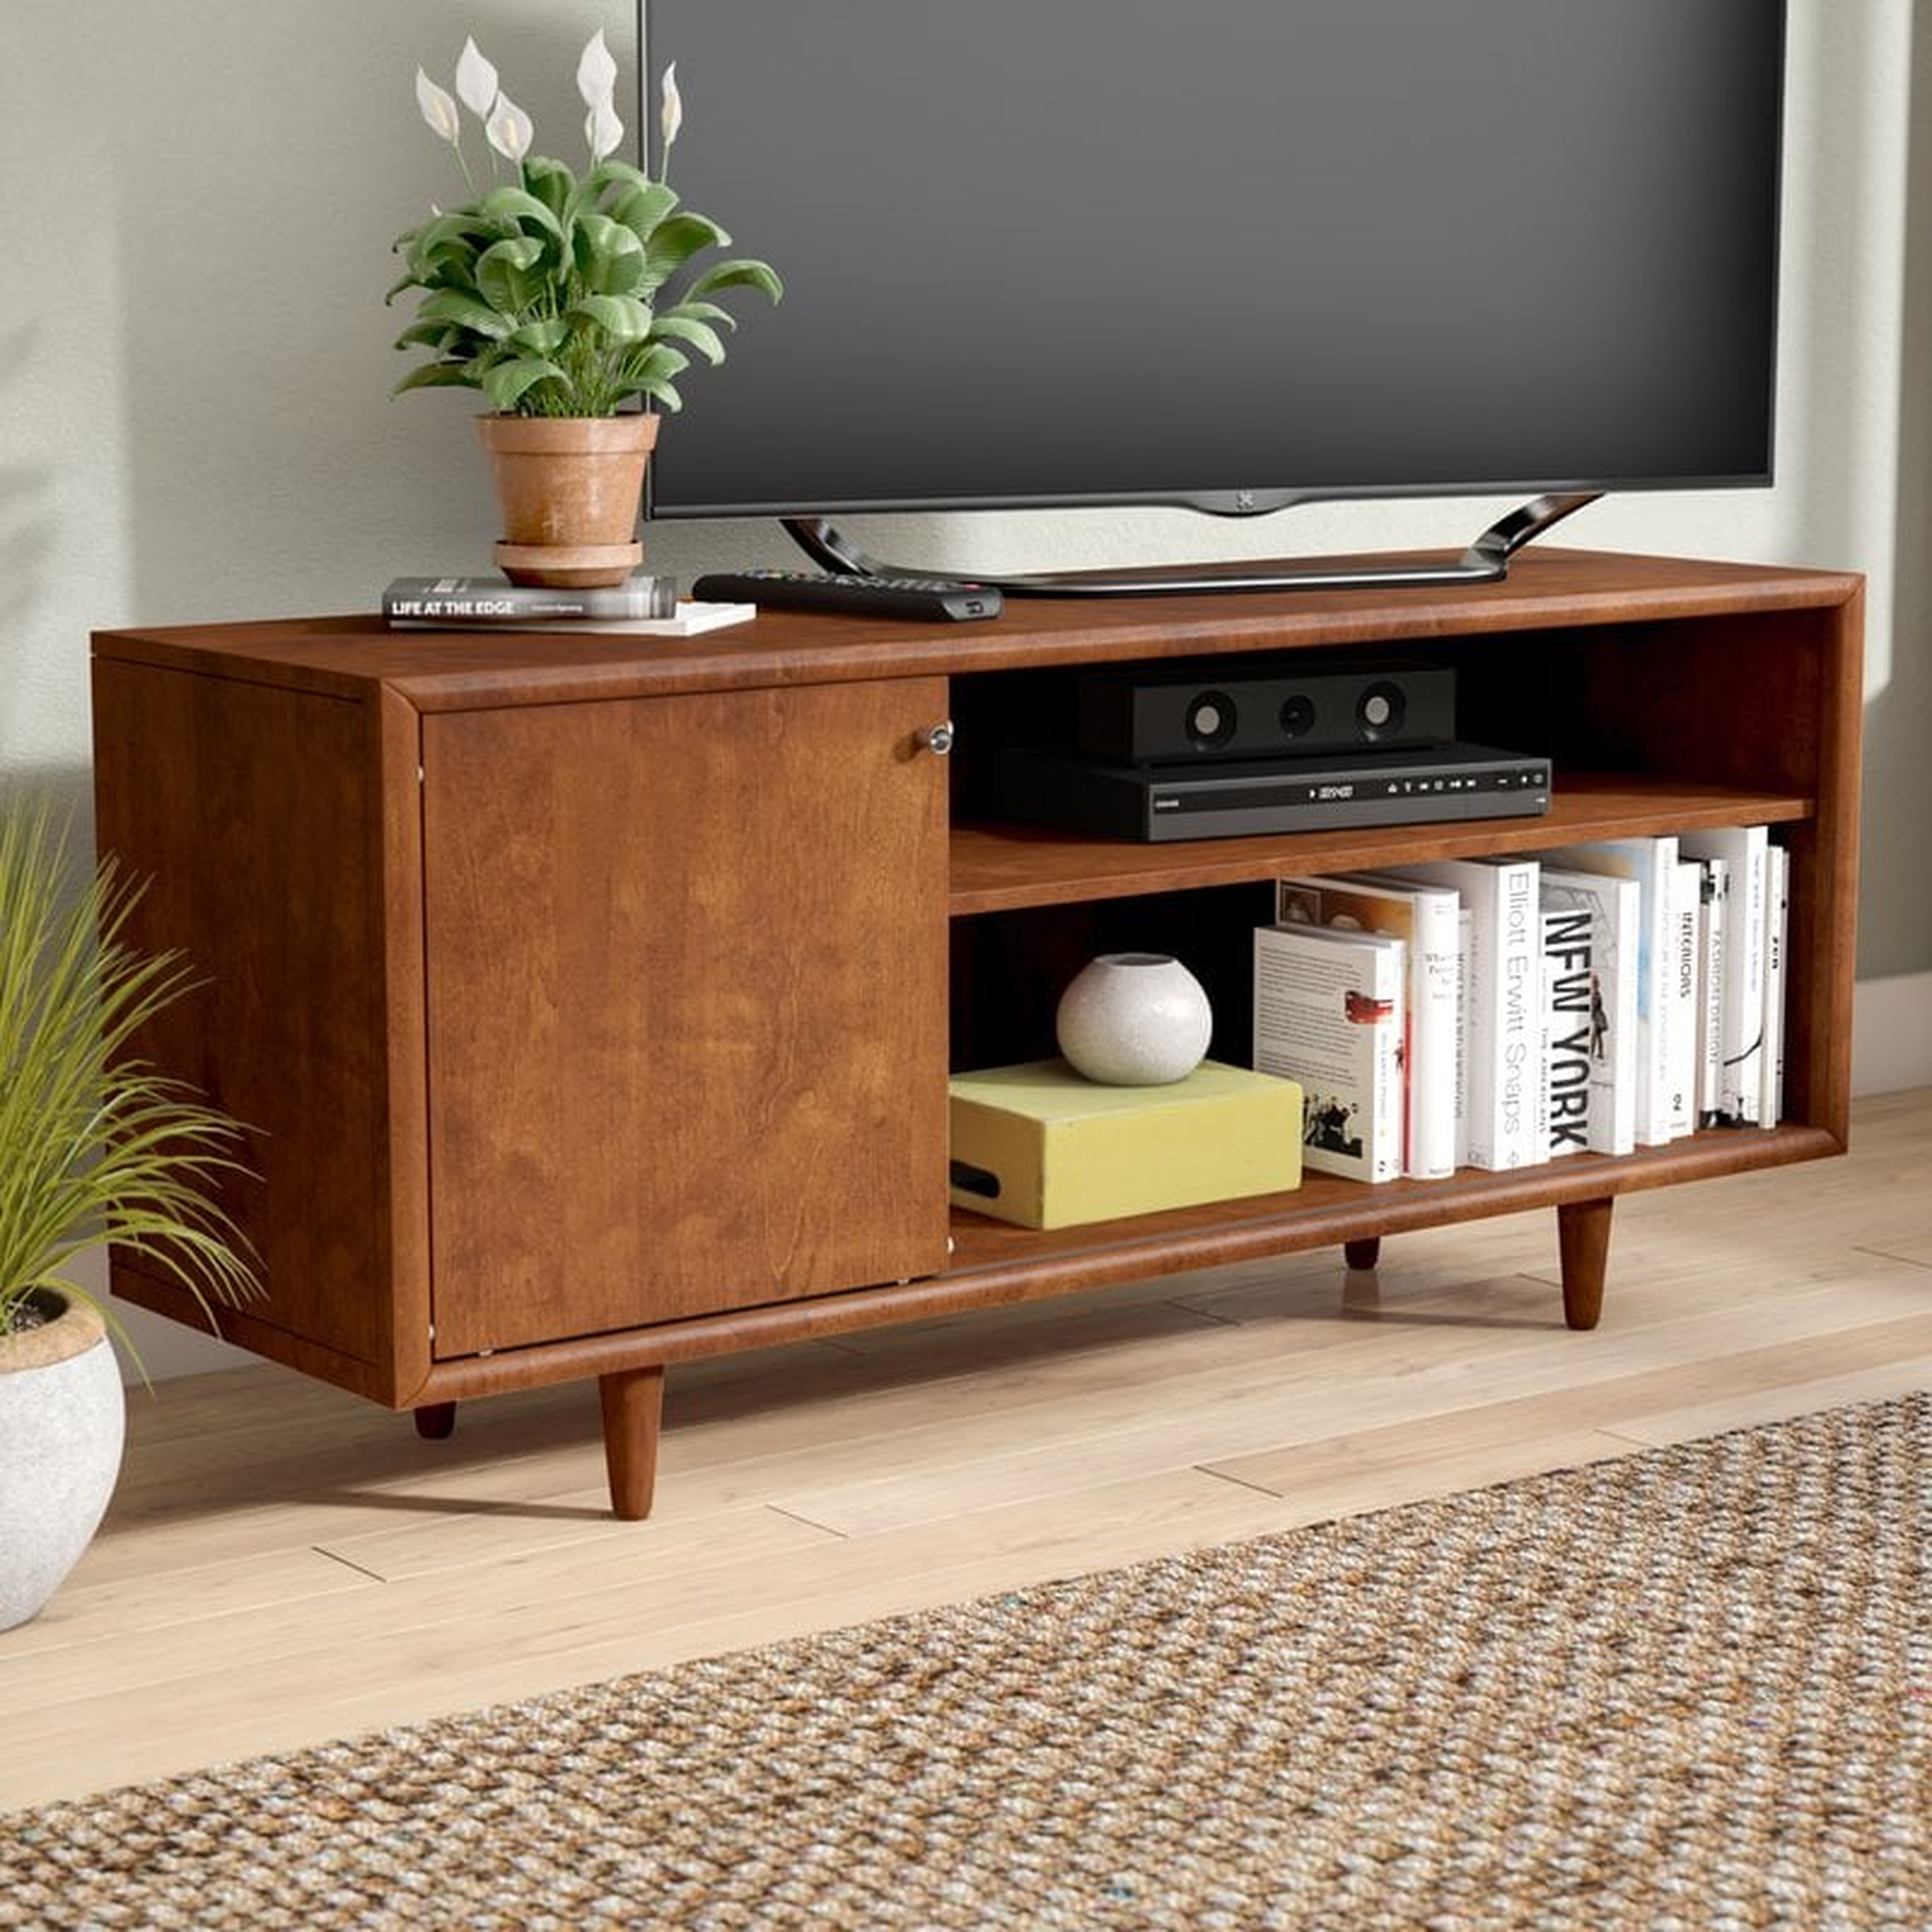 Raven TV Stand for TVs up to 60" - Wayfair